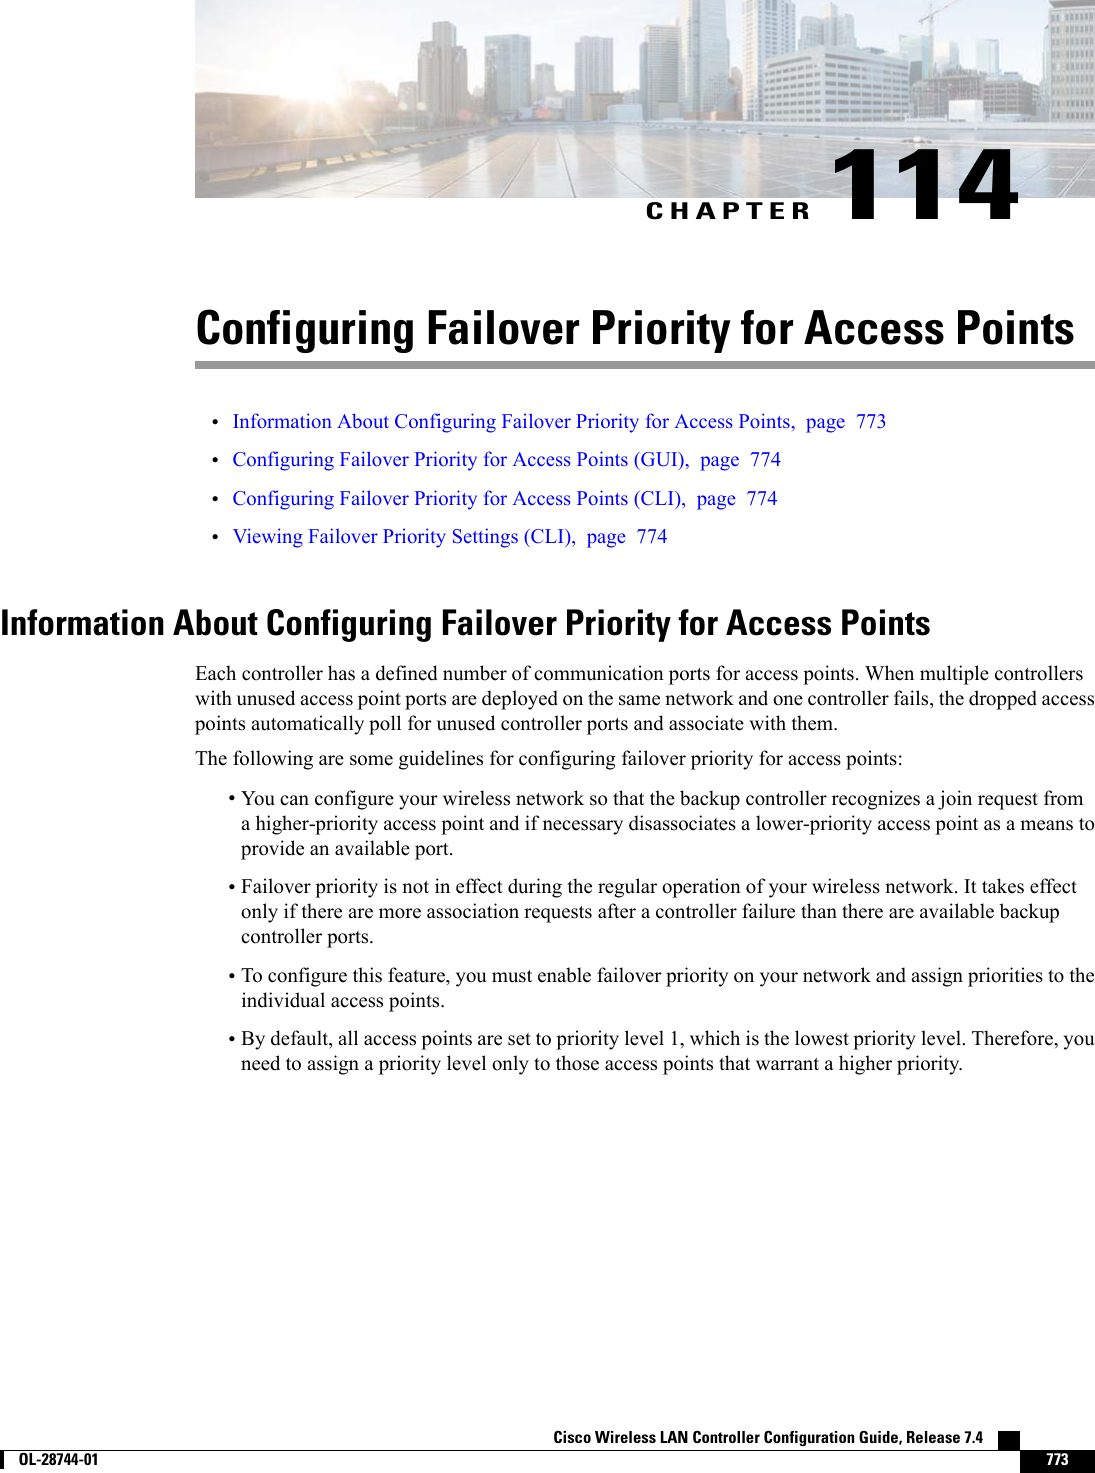 CHAPTER 114Configuring Failover Priority for Access Points•Information About Configuring Failover Priority for Access Points, page 773•Configuring Failover Priority for Access Points (GUI), page 774•Configuring Failover Priority for Access Points (CLI), page 774•Viewing Failover Priority Settings (CLI), page 774Information About Configuring Failover Priority for Access PointsEach controller has a defined number of communication ports for access points. When multiple controllerswith unused access point ports are deployed on the same network and one controller fails, the dropped accesspoints automatically poll for unused controller ports and associate with them.The following are some guidelines for configuring failover priority for access points:•You can configure your wireless network so that the backup controller recognizes a join request froma higher-priority access point and if necessary disassociates a lower-priority access point as a means toprovide an available port.•Failover priority is not in effect during the regular operation of your wireless network. It takes effectonly if there are more association requests after a controller failure than there are available backupcontroller ports.•To configure this feature, you must enable failover priority on your network and assign priorities to theindividual access points.•By default, all access points are set to priority level 1, which is the lowest priority level. Therefore, youneed to assign a priority level only to those access points that warrant a higher priority.Cisco Wireless LAN Controller Configuration Guide, Release 7.4        OL-28744-01 773